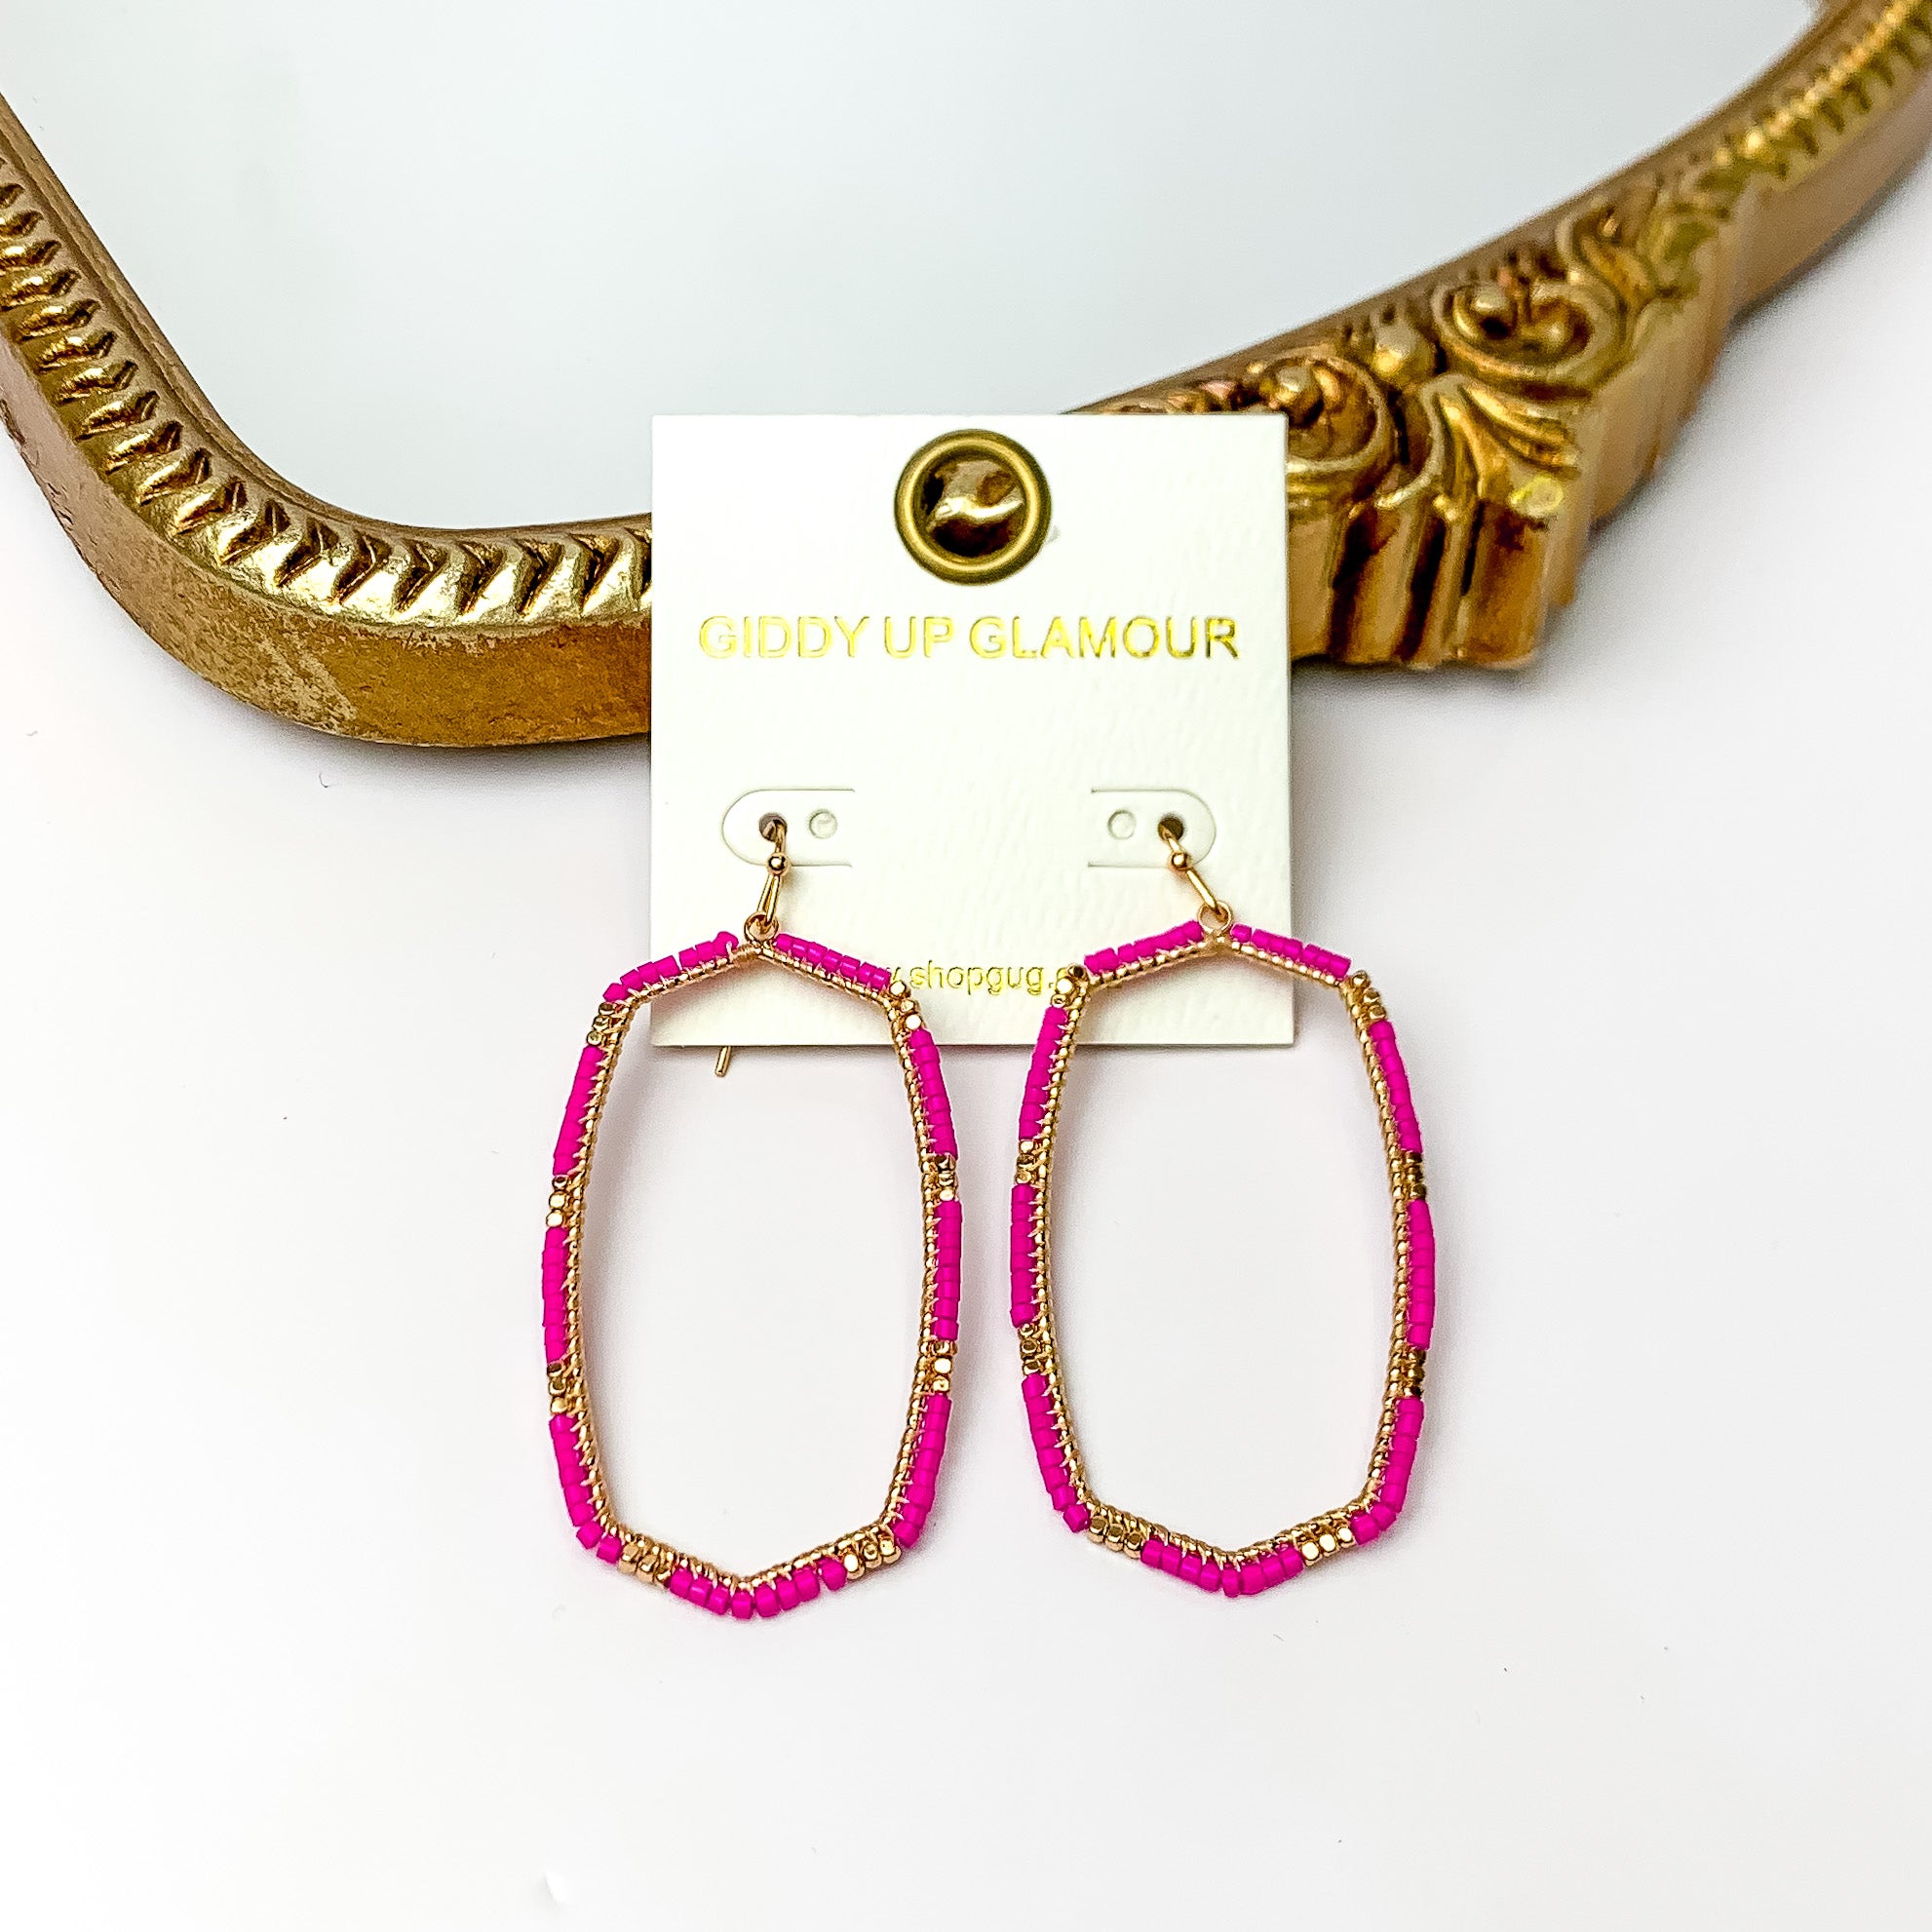 Hot Pink Beaded Open Large Drop Earrings with Gold Tone Accessory. Pictured on a white background with a gold frame through it.